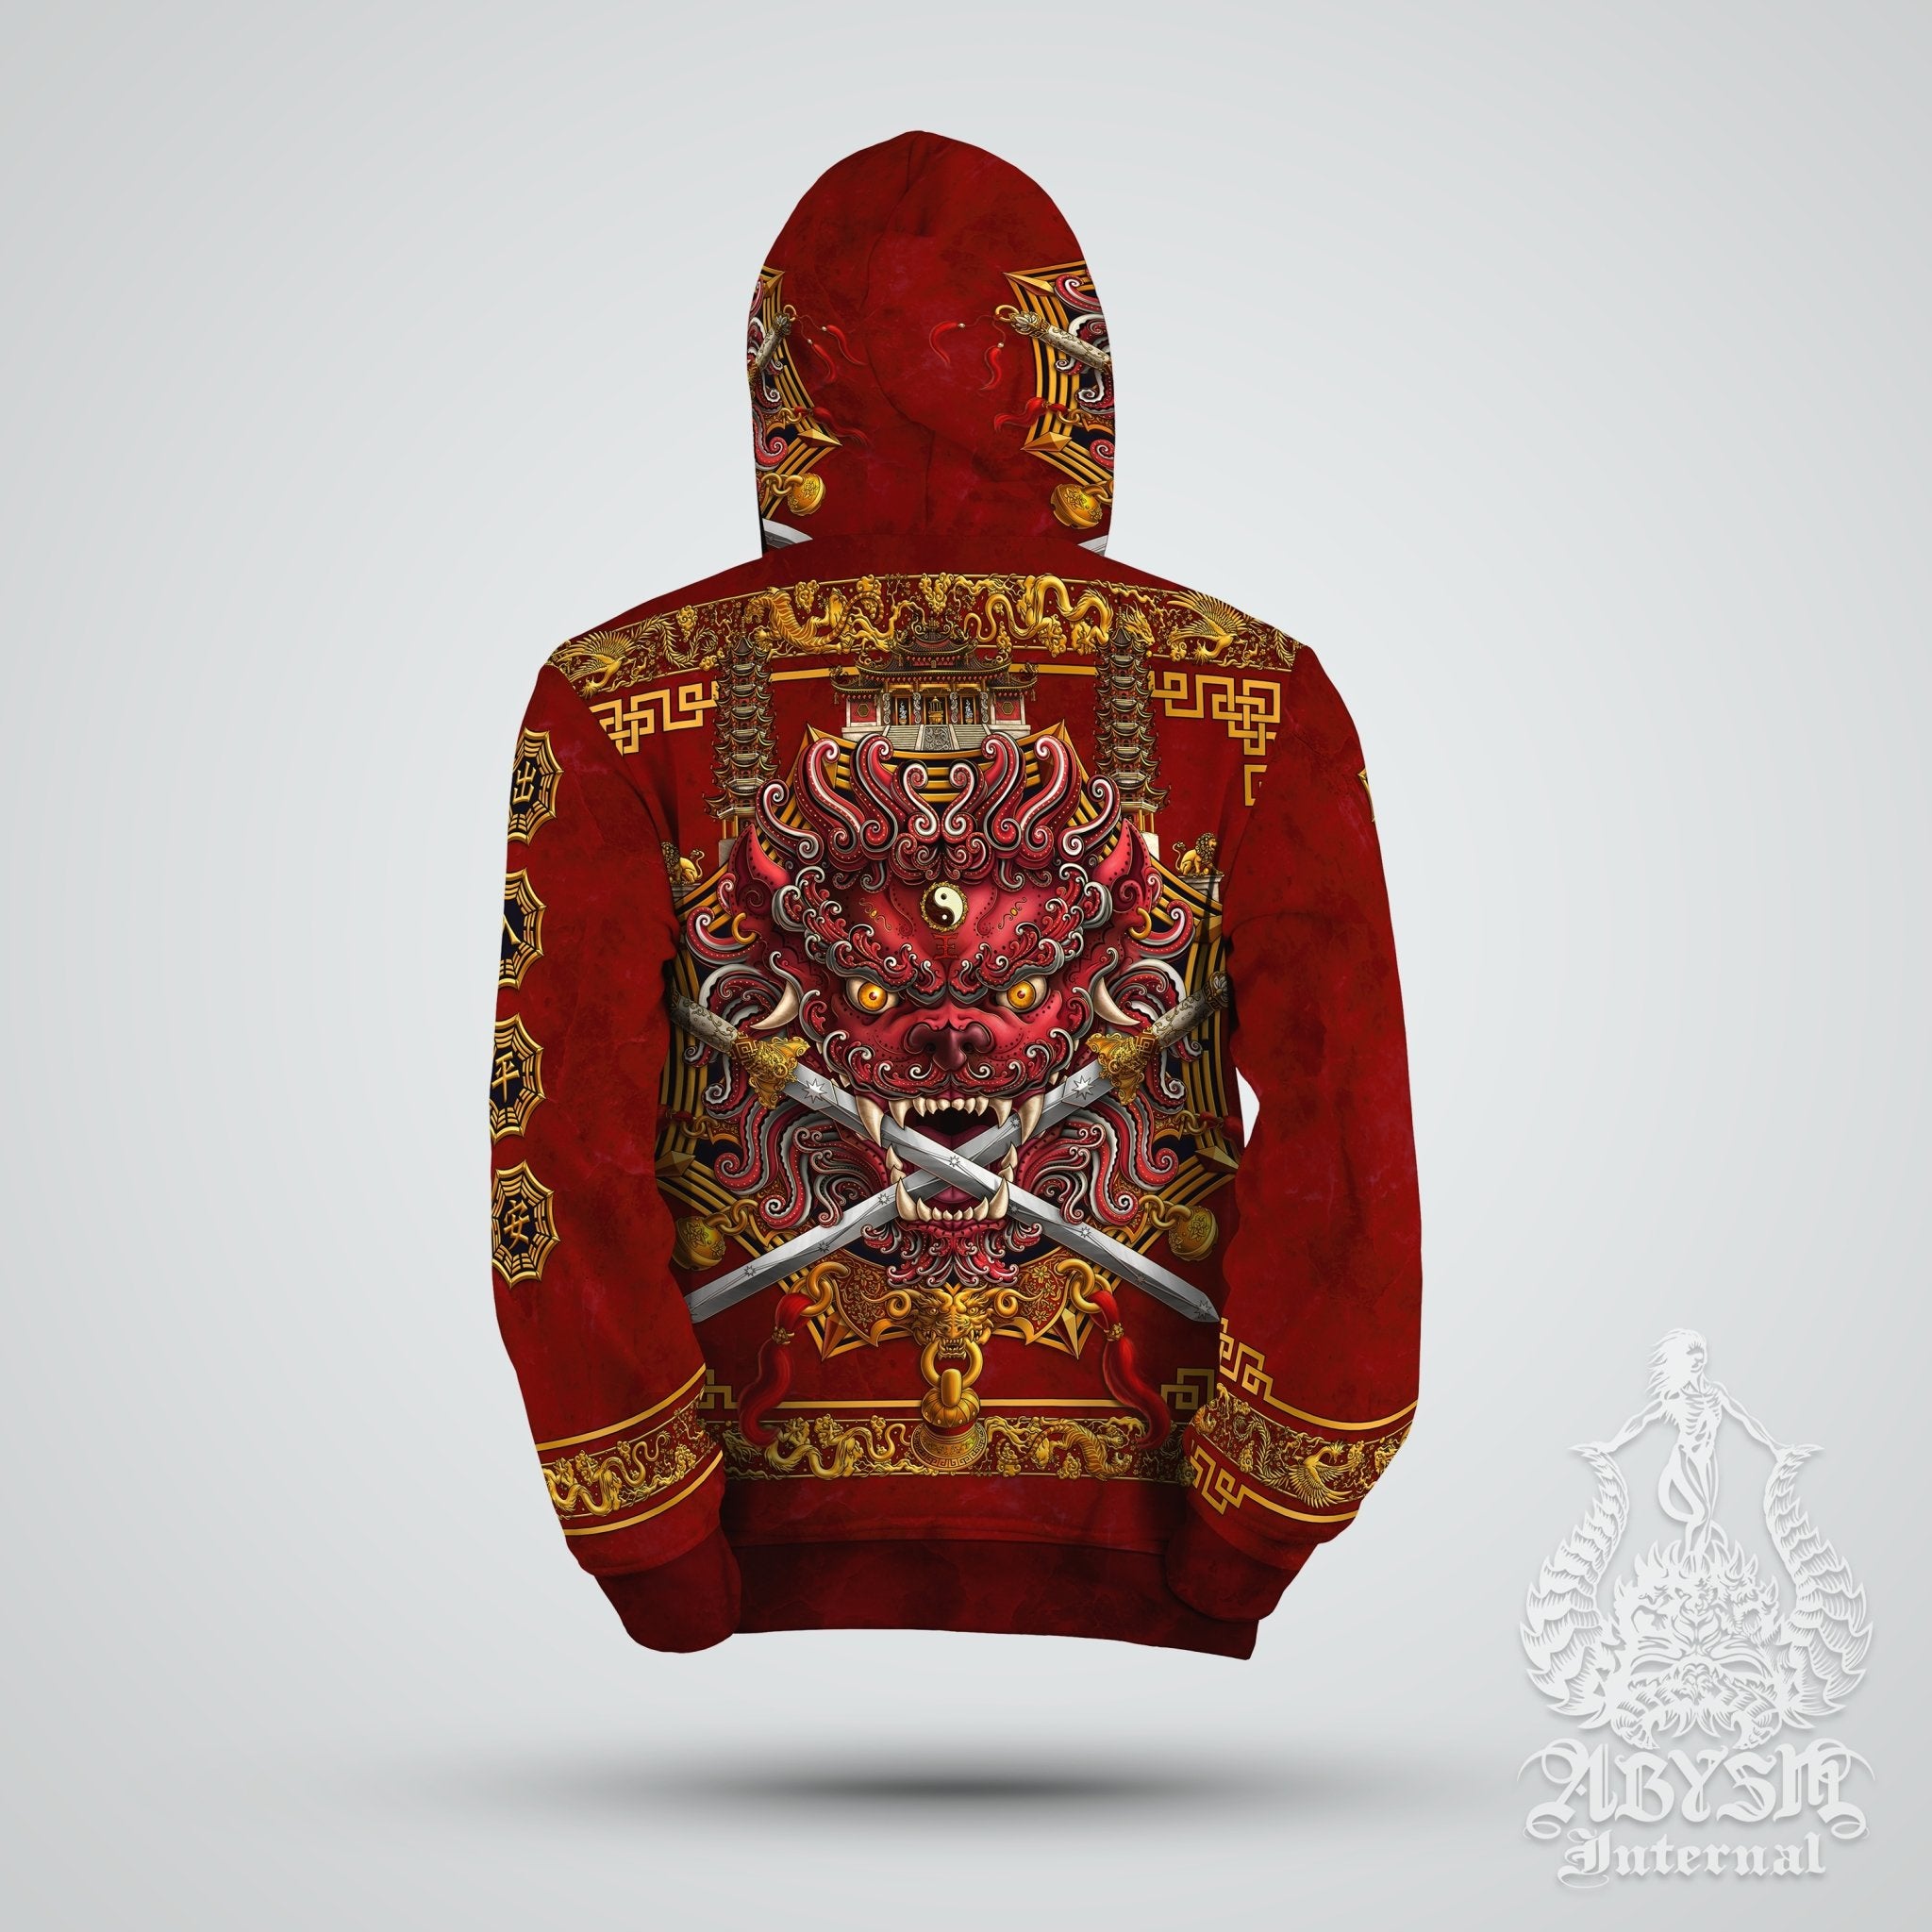 Lion Hoodie, Street Outfit, Chinese Streetwear, Taiwan Sword Lion, Asian Art Apparel, Alternative Clothing, Unisex - Red - Abysm Internal